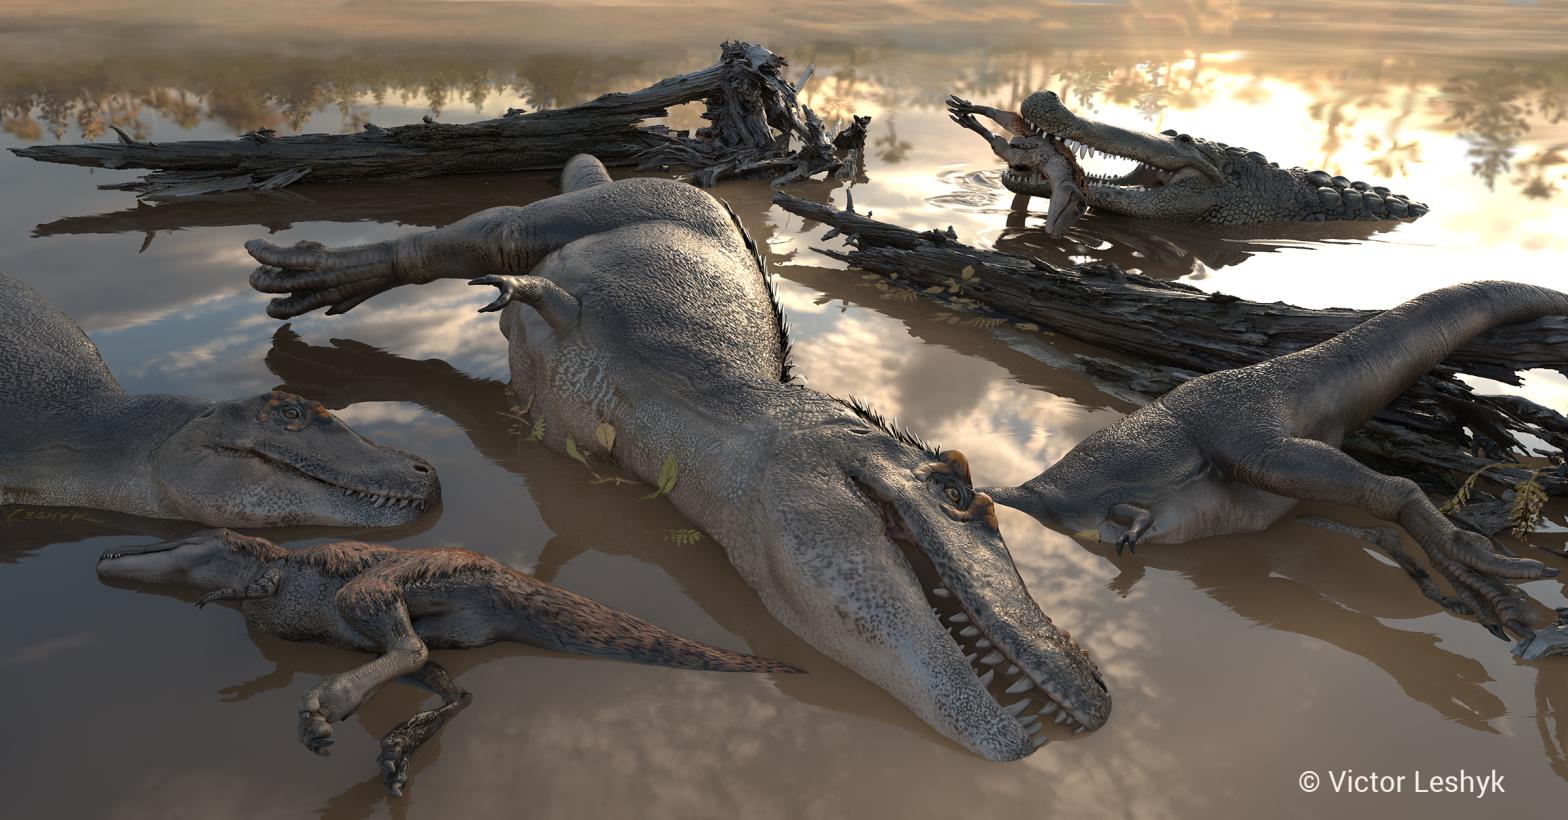 Artist's impression of the tyrannosaurs shortly after being killed in a flood and washed into a nearby lake. A Deinosuchus alligator is shown n in the background.  (Image: Victor Leshyk)